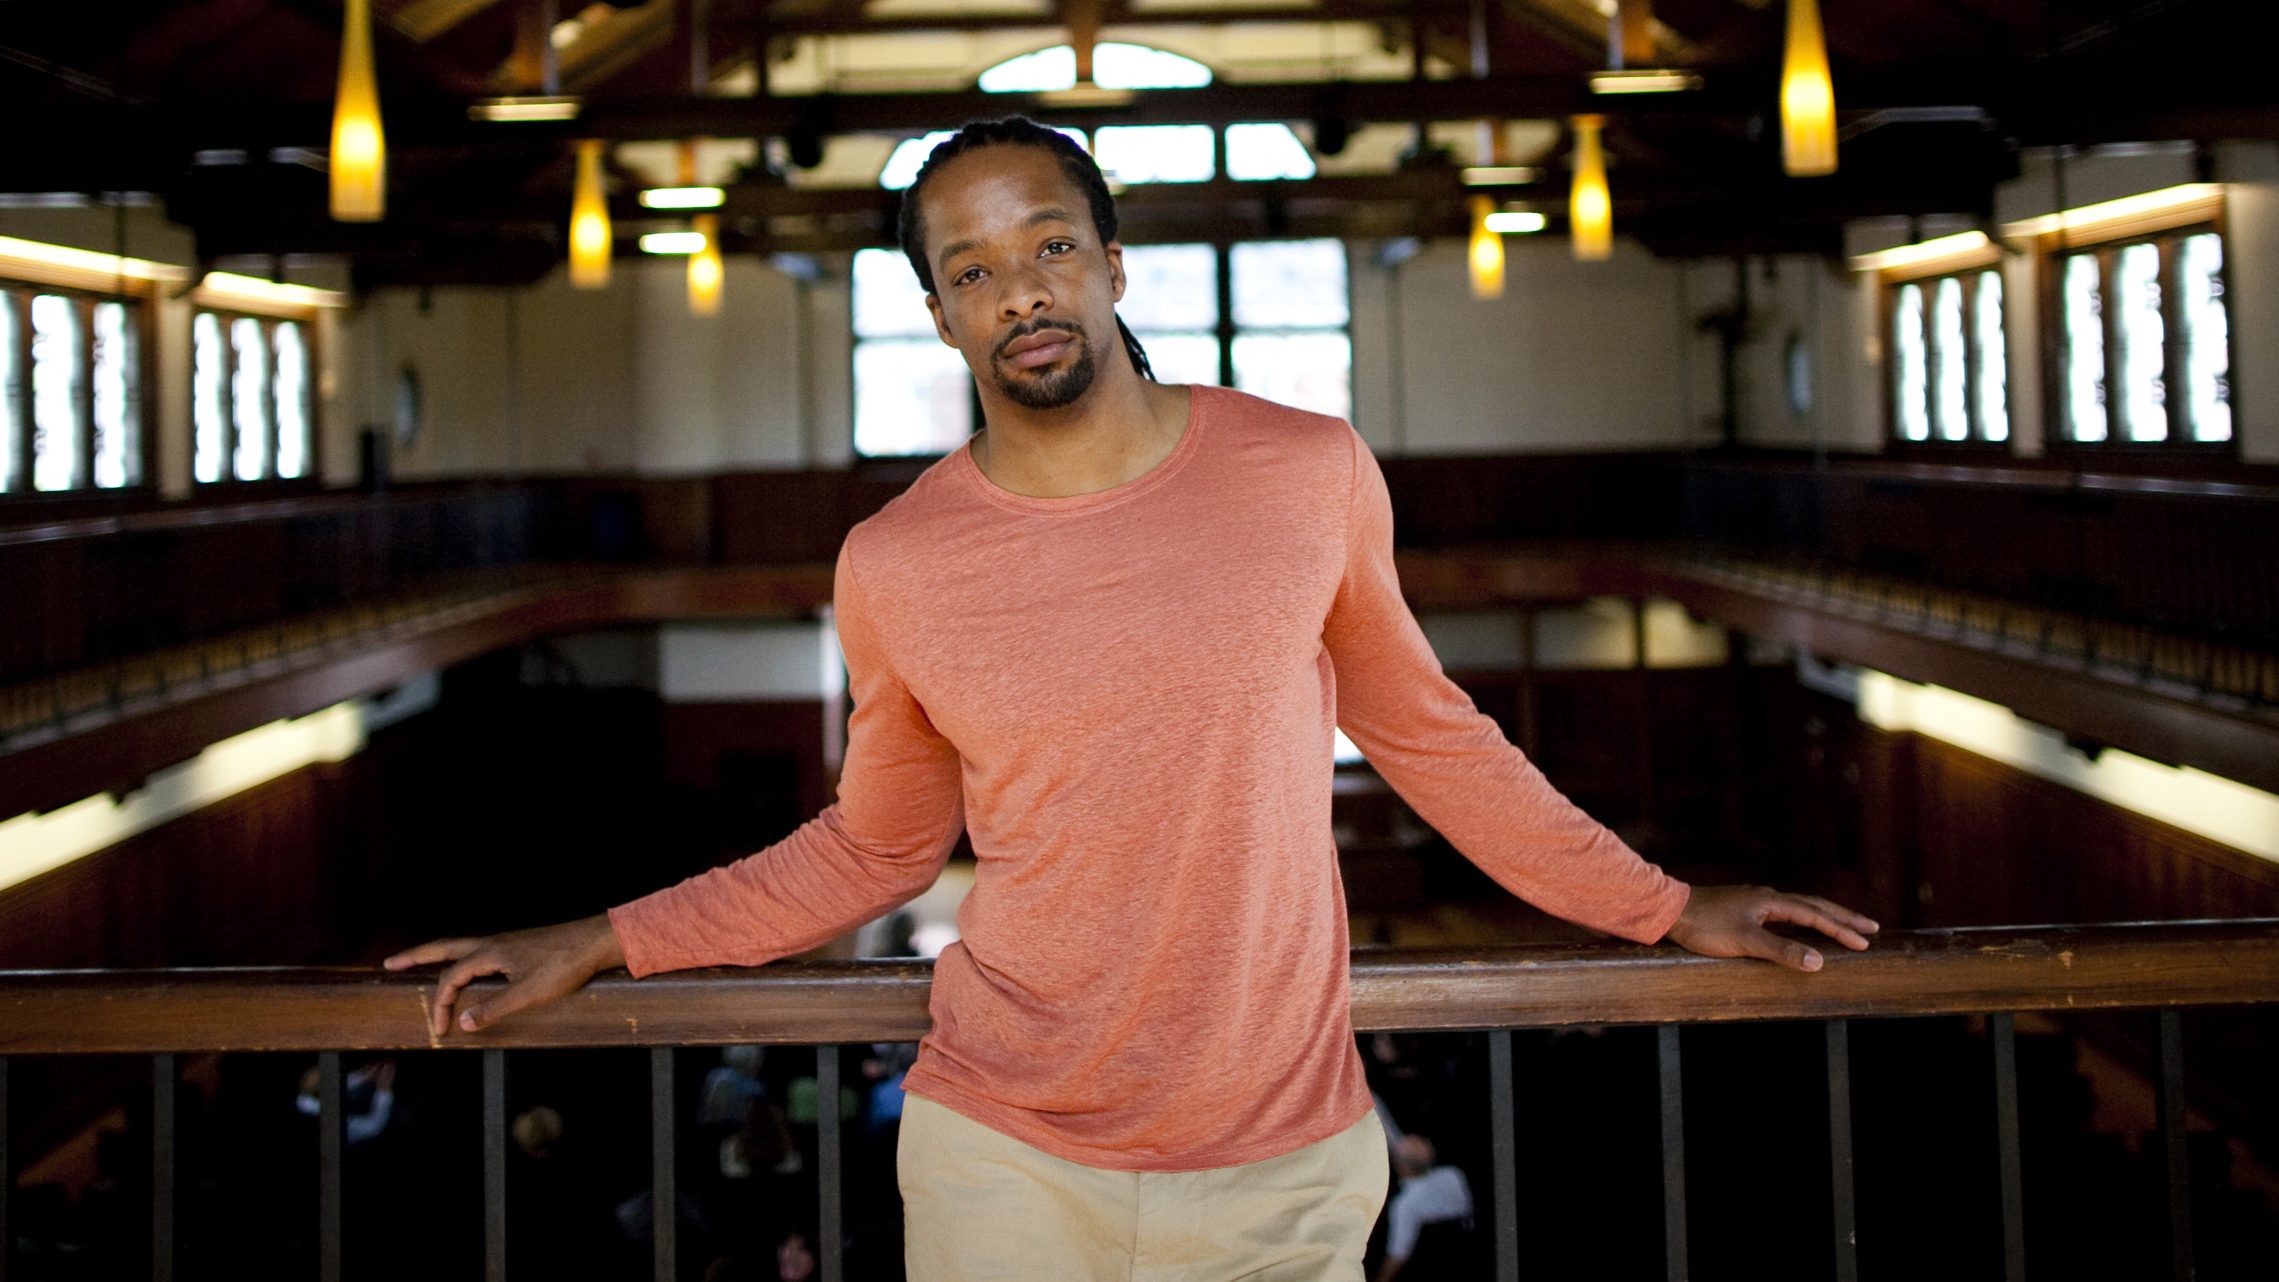 Jericho Brown stands on the balcony of a large room with vaulted ceilings and dark wooden rafters. He is a Black man with long hair pulled into a ponytail, a goatee, a salmon-colored shirt and khaki pants. His hands are resting on a railing behind him.